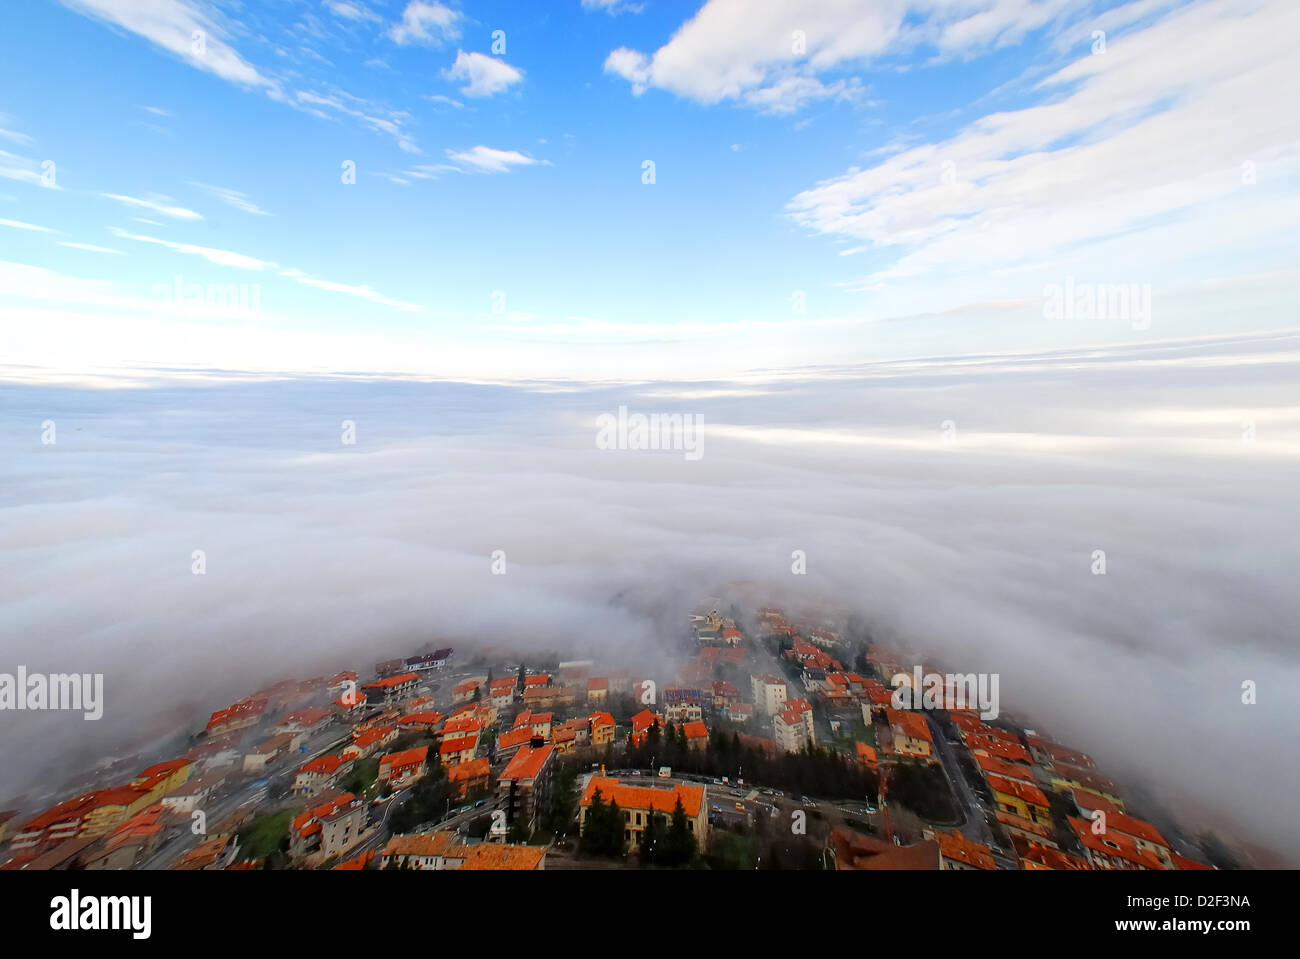 Serenissima Repubblica di San Marino. January 21, 2013 , The territory of San Marino Republic was covered up with a thick coat of clouds. Only the towers on Mount Titano pierced  the clouds. Credit: Ferdinando Piezzi Stock Photo